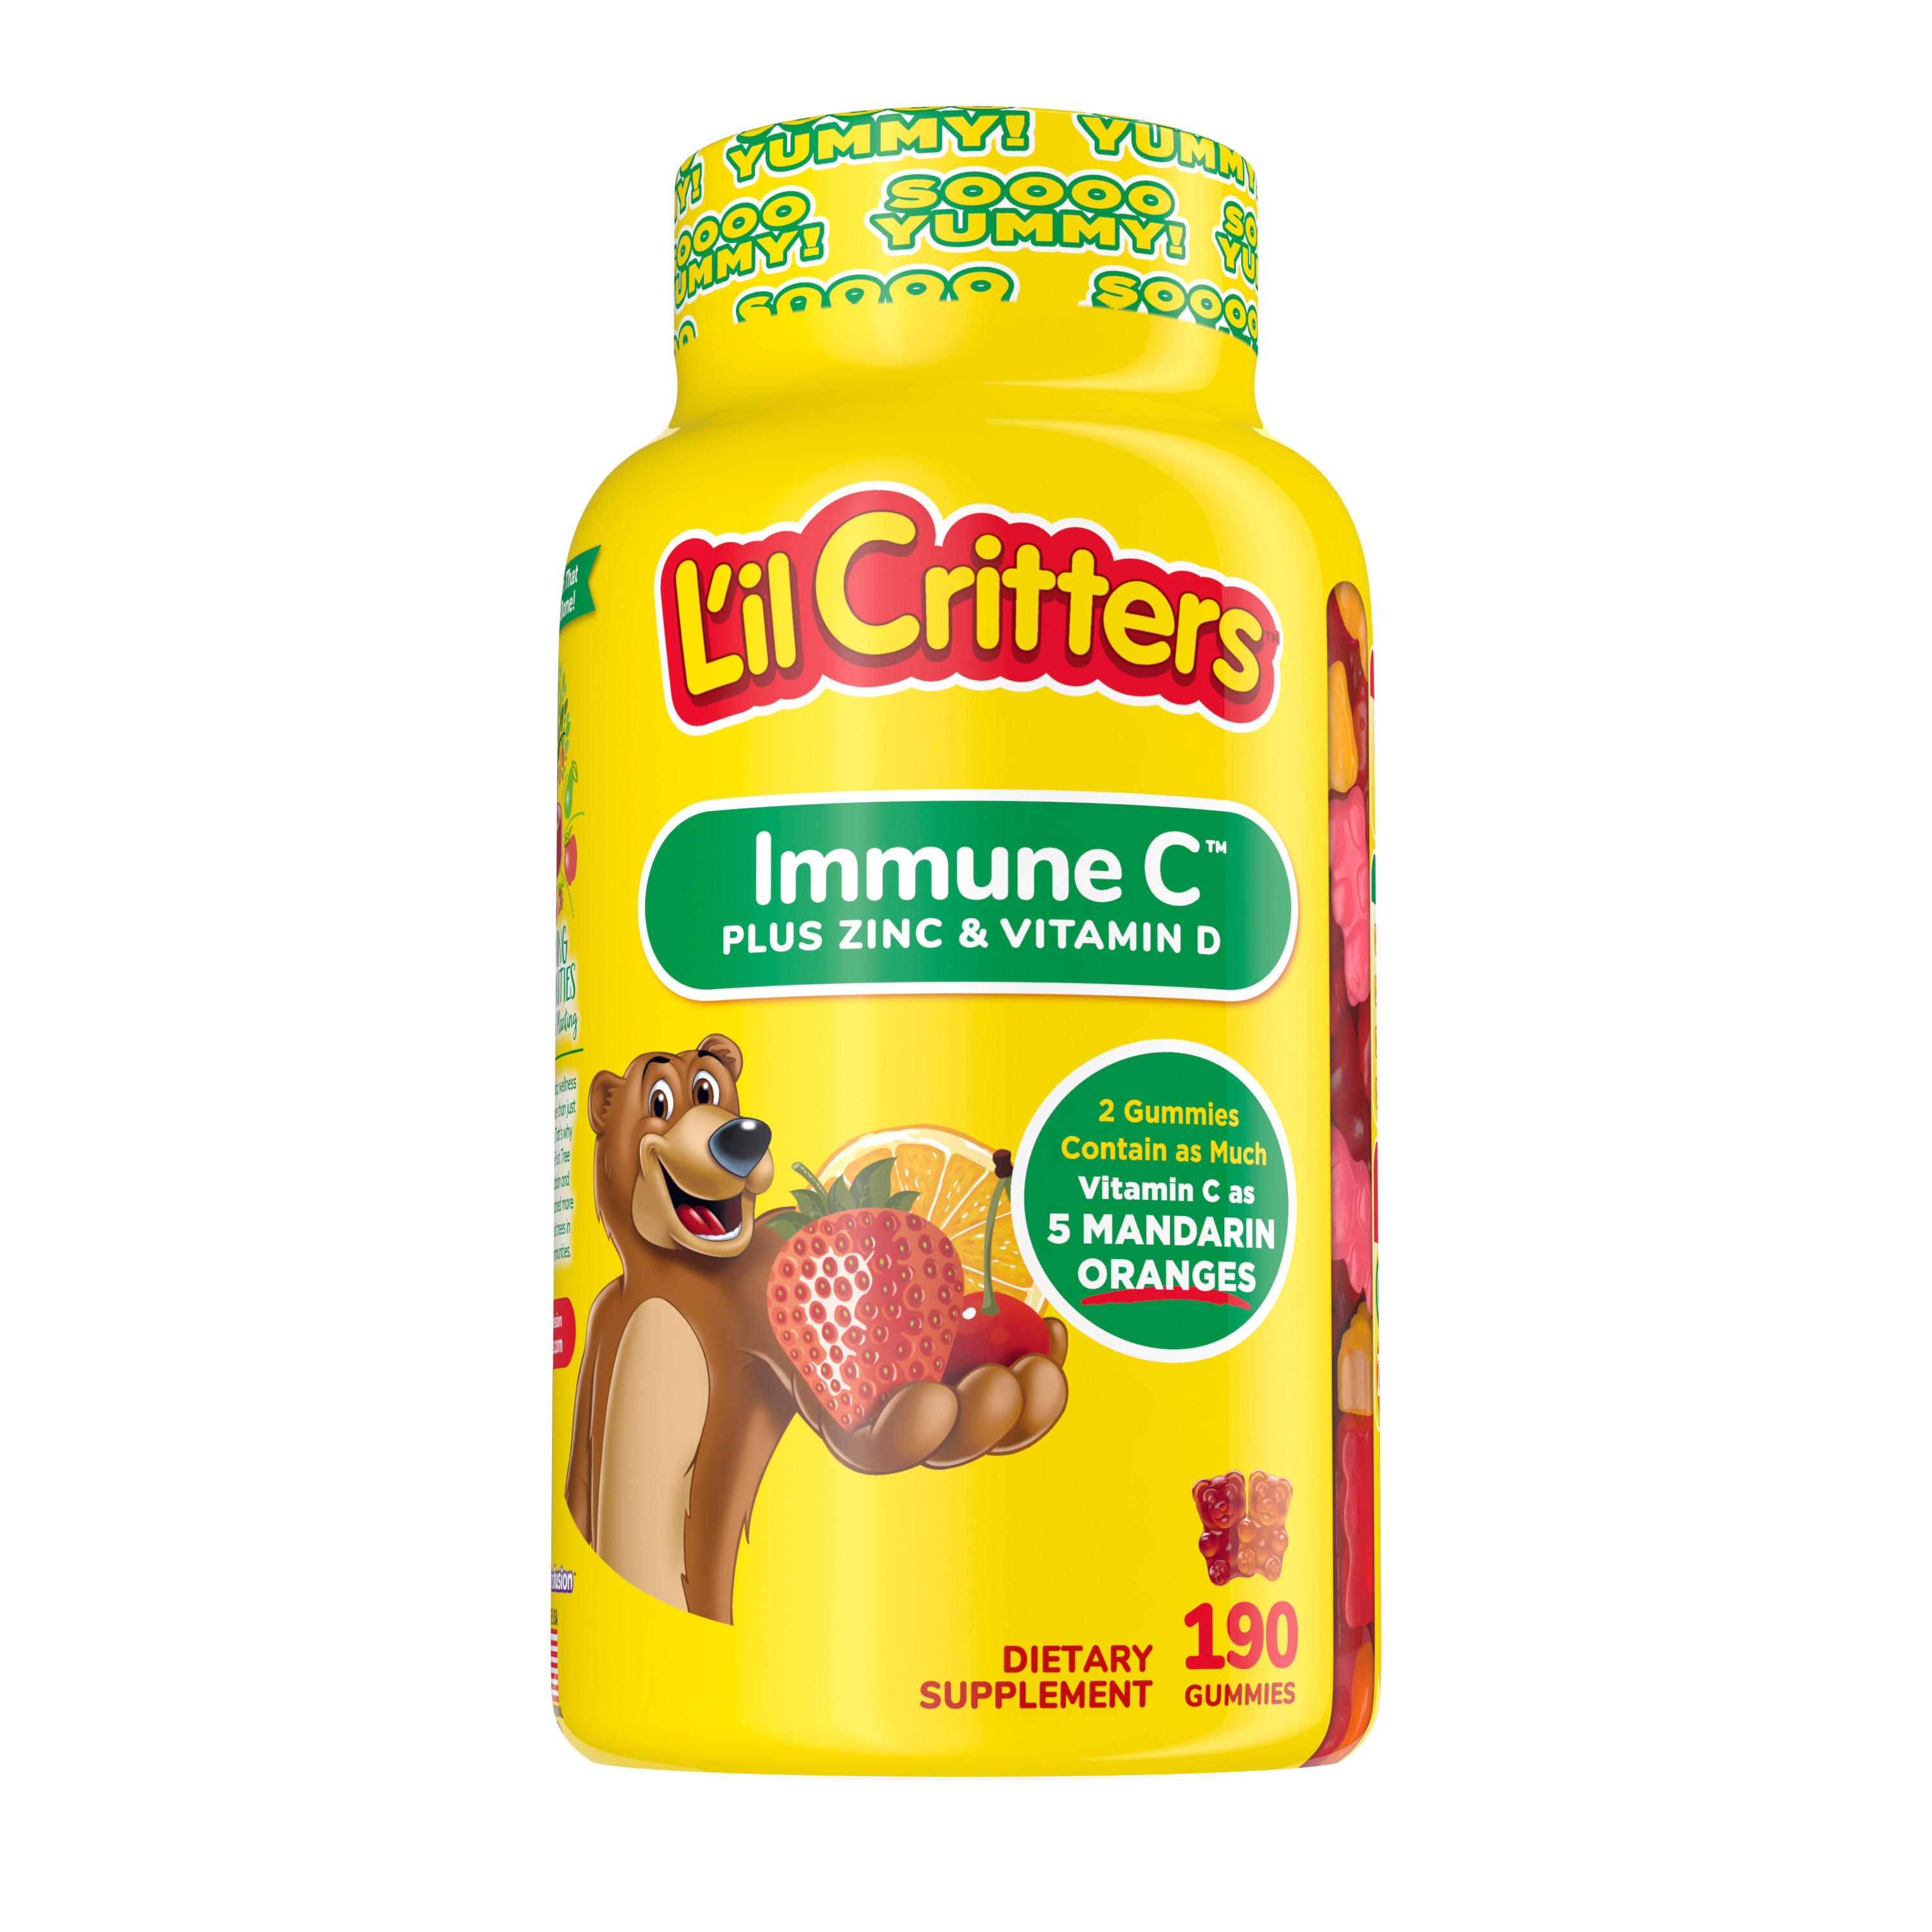 L'il Critters Immune C Kids Gummy Vitamin Supplement, Fruit Flavored Gummy  with Vitamin C, Zinc and Vitamin D,  190 Count - image 1 of 10